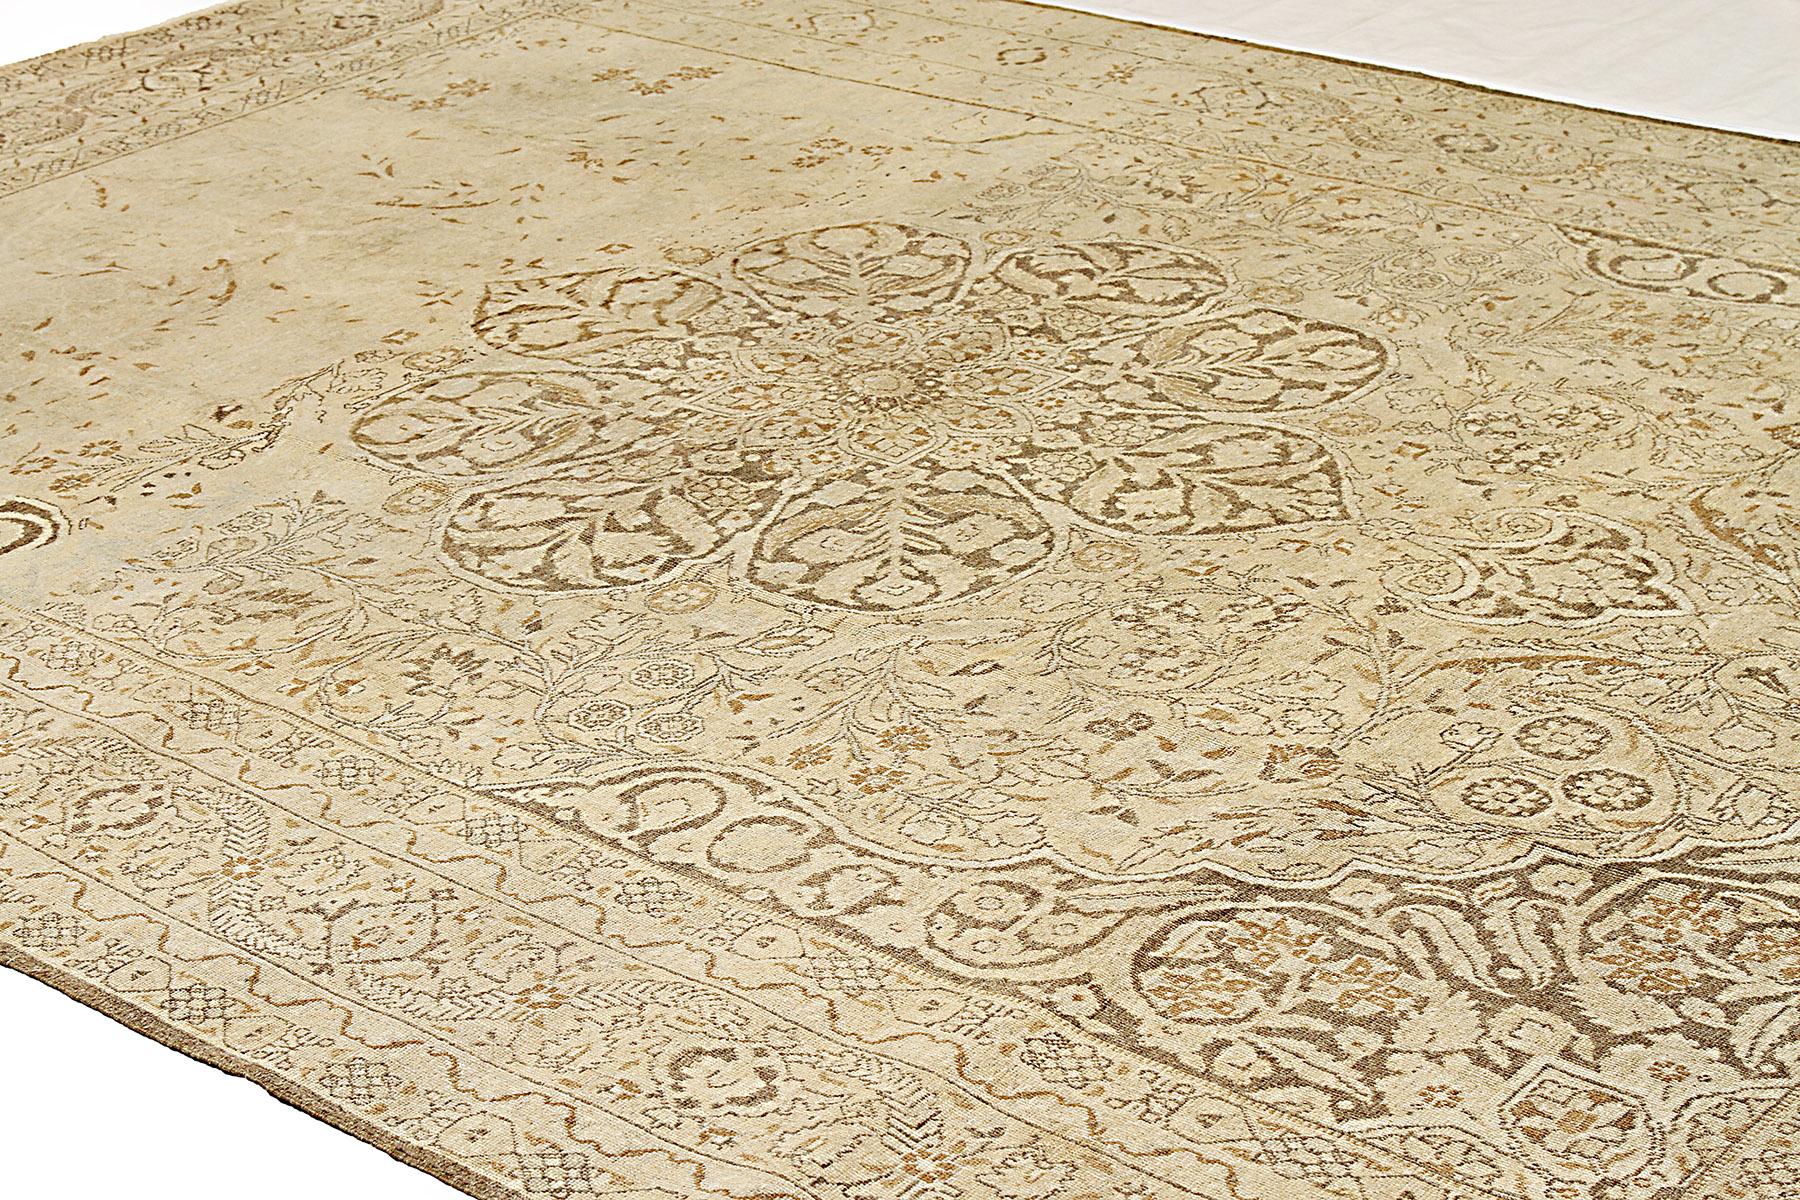 Hand-Woven 20th Century Antique Persian Tabriz Rug with Black & Brown Flower Motifs For Sale